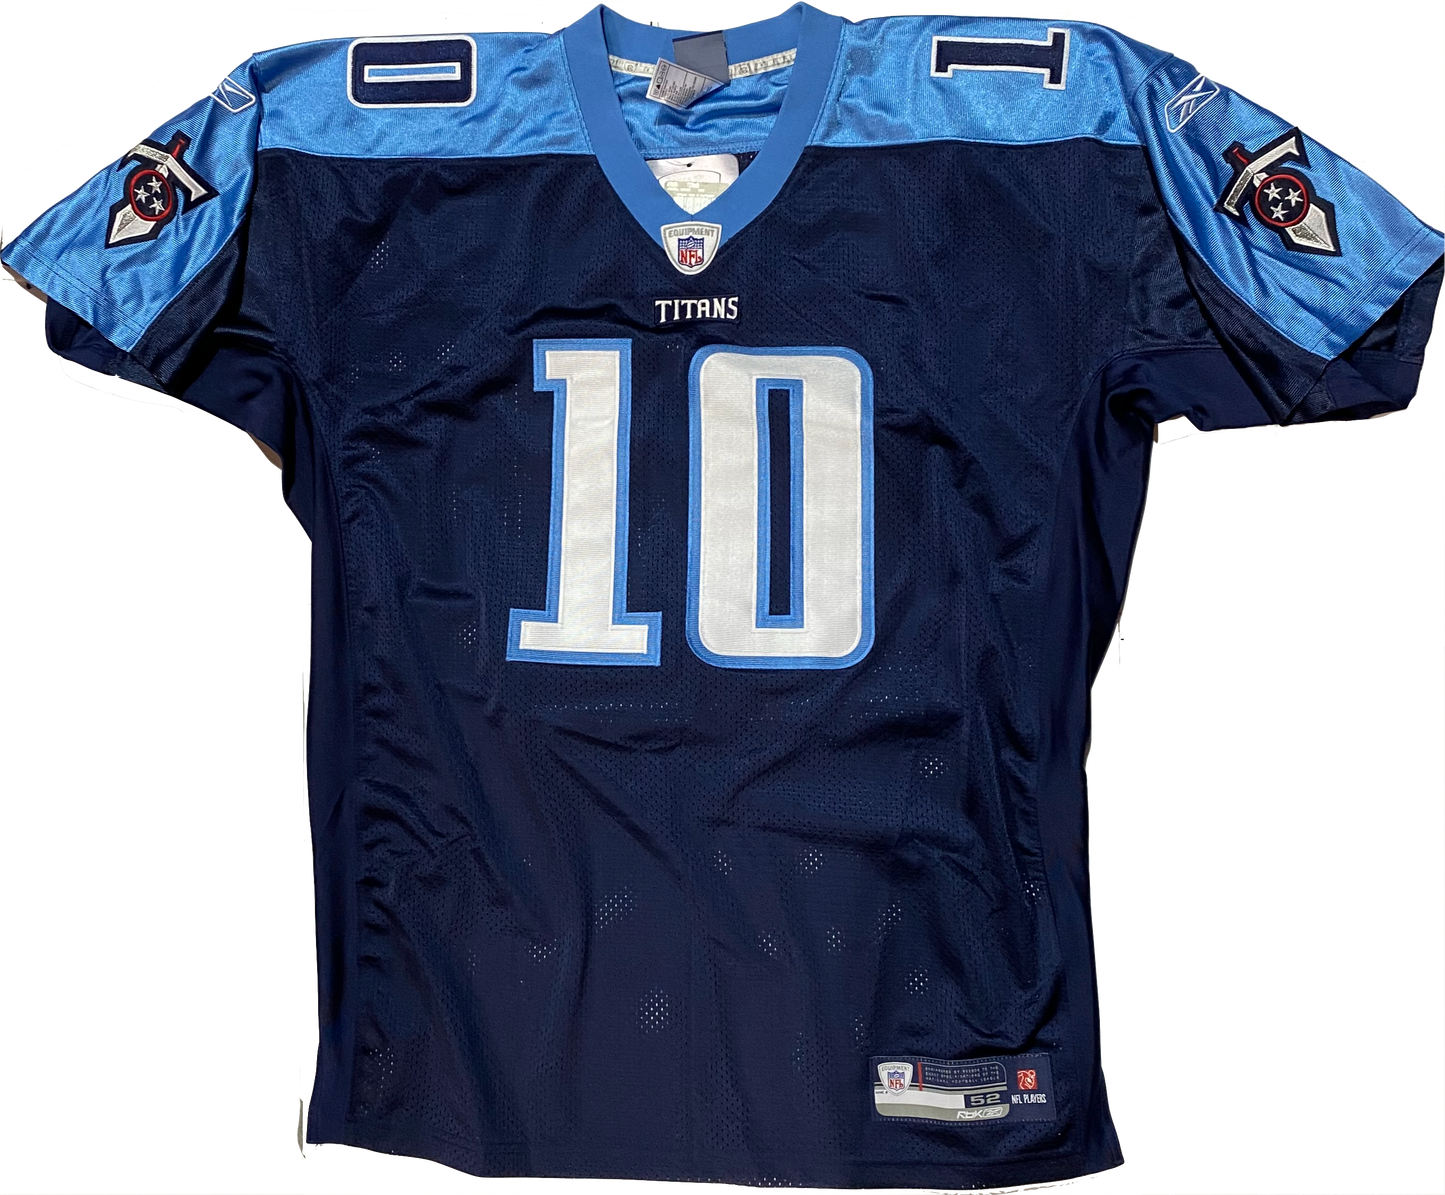 Men's Reebok NFL Tennessee Titans Vince Young Navy AUTHENTIC Football Jersey